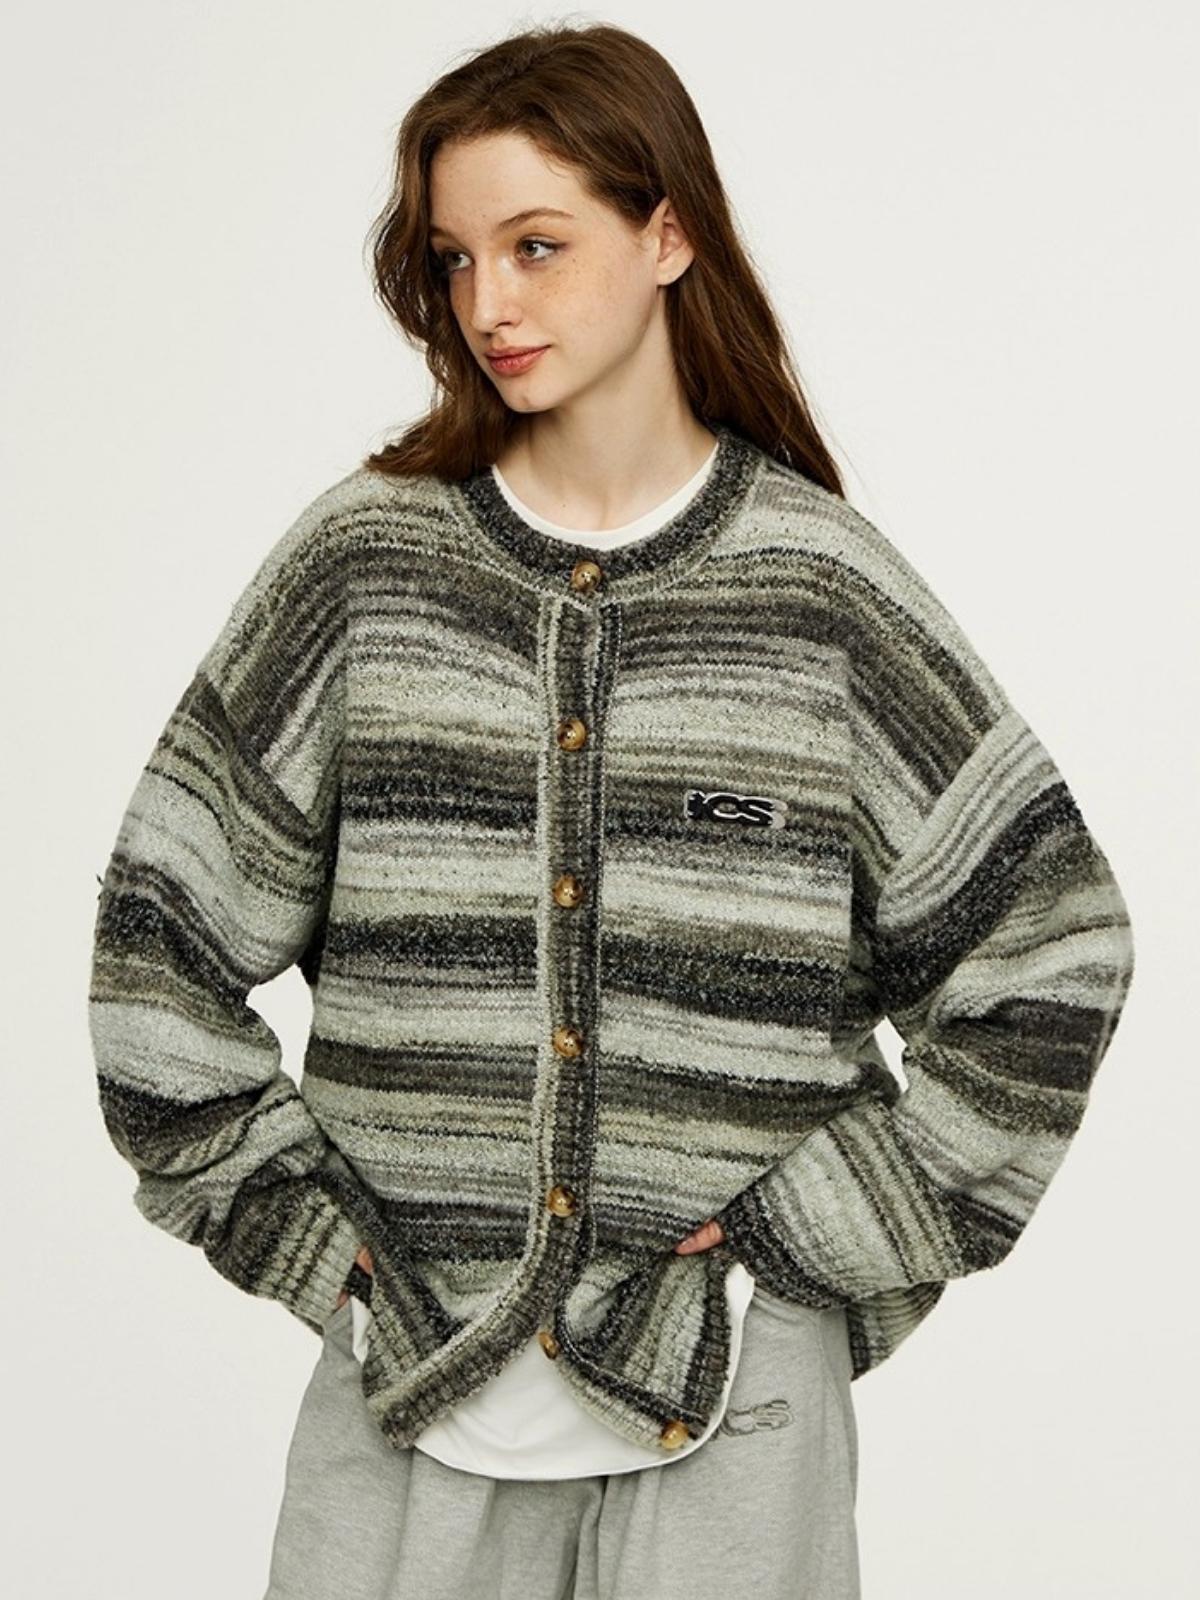 We Love Street Colorful Gradient Striped Cardigan Retro Knitted